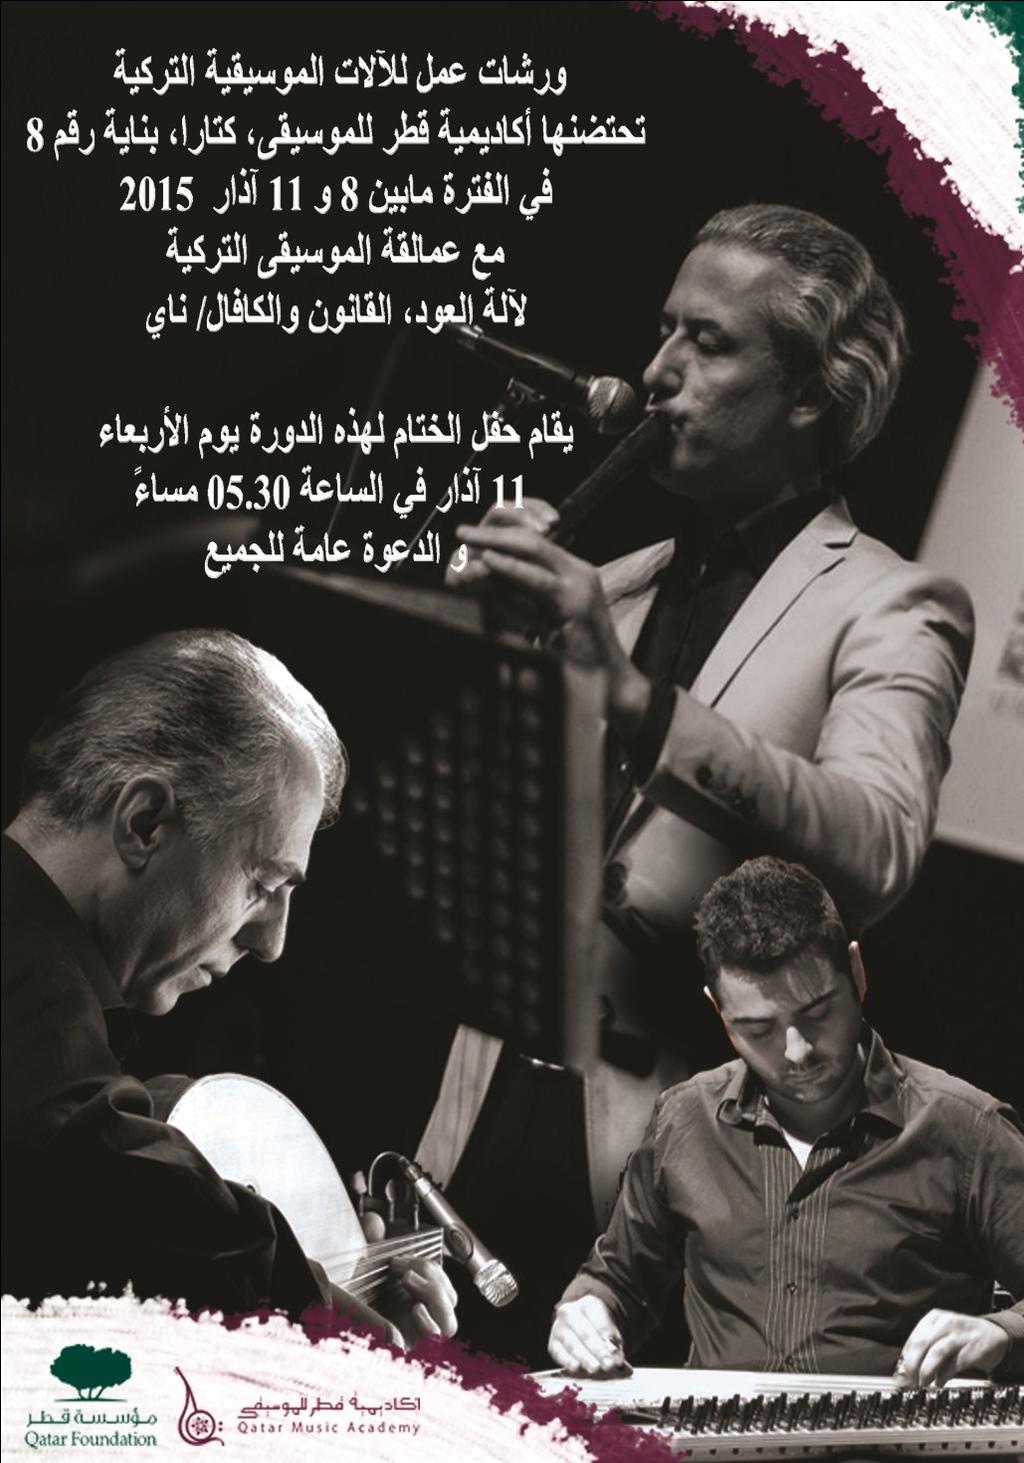 There will be a four days of intensive workshops and master classes for all ud, qanun and nay students from the Academic and the Music for all Programmes.